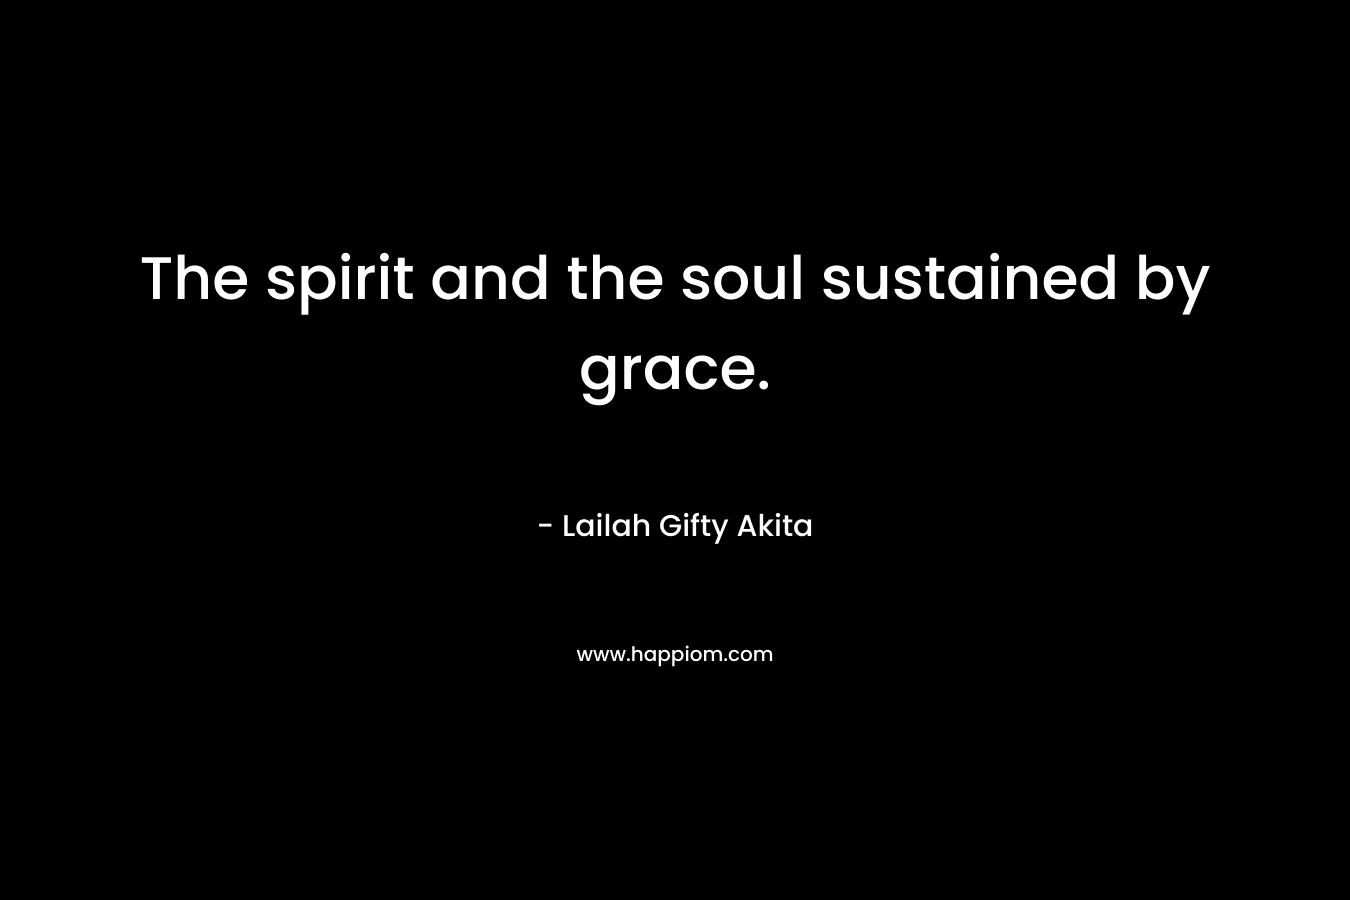 The spirit and the soul sustained by grace.